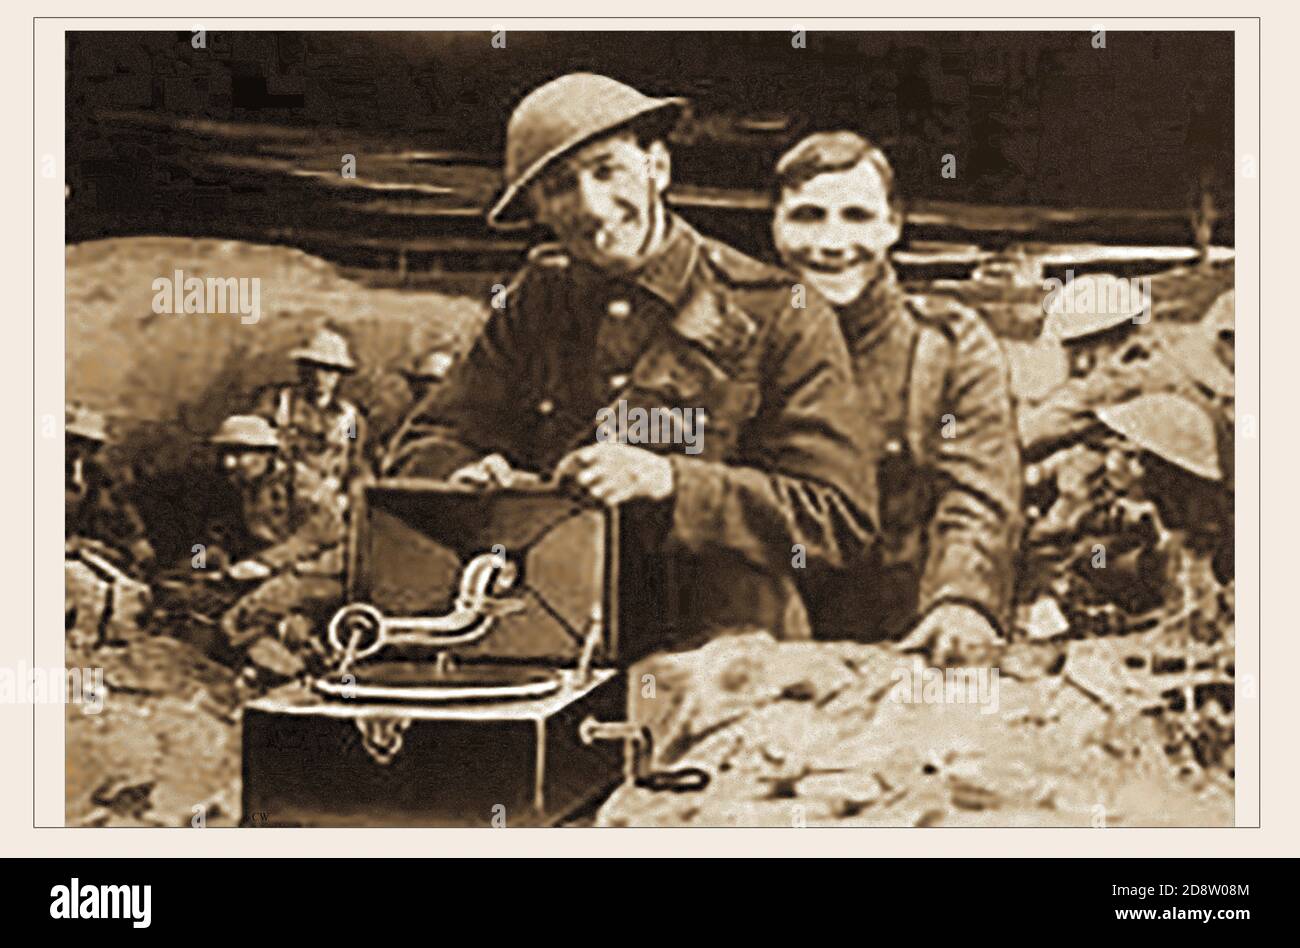 British troops with a gramophone in the trenches WWI (from a postcard of the time.) Stock Photo